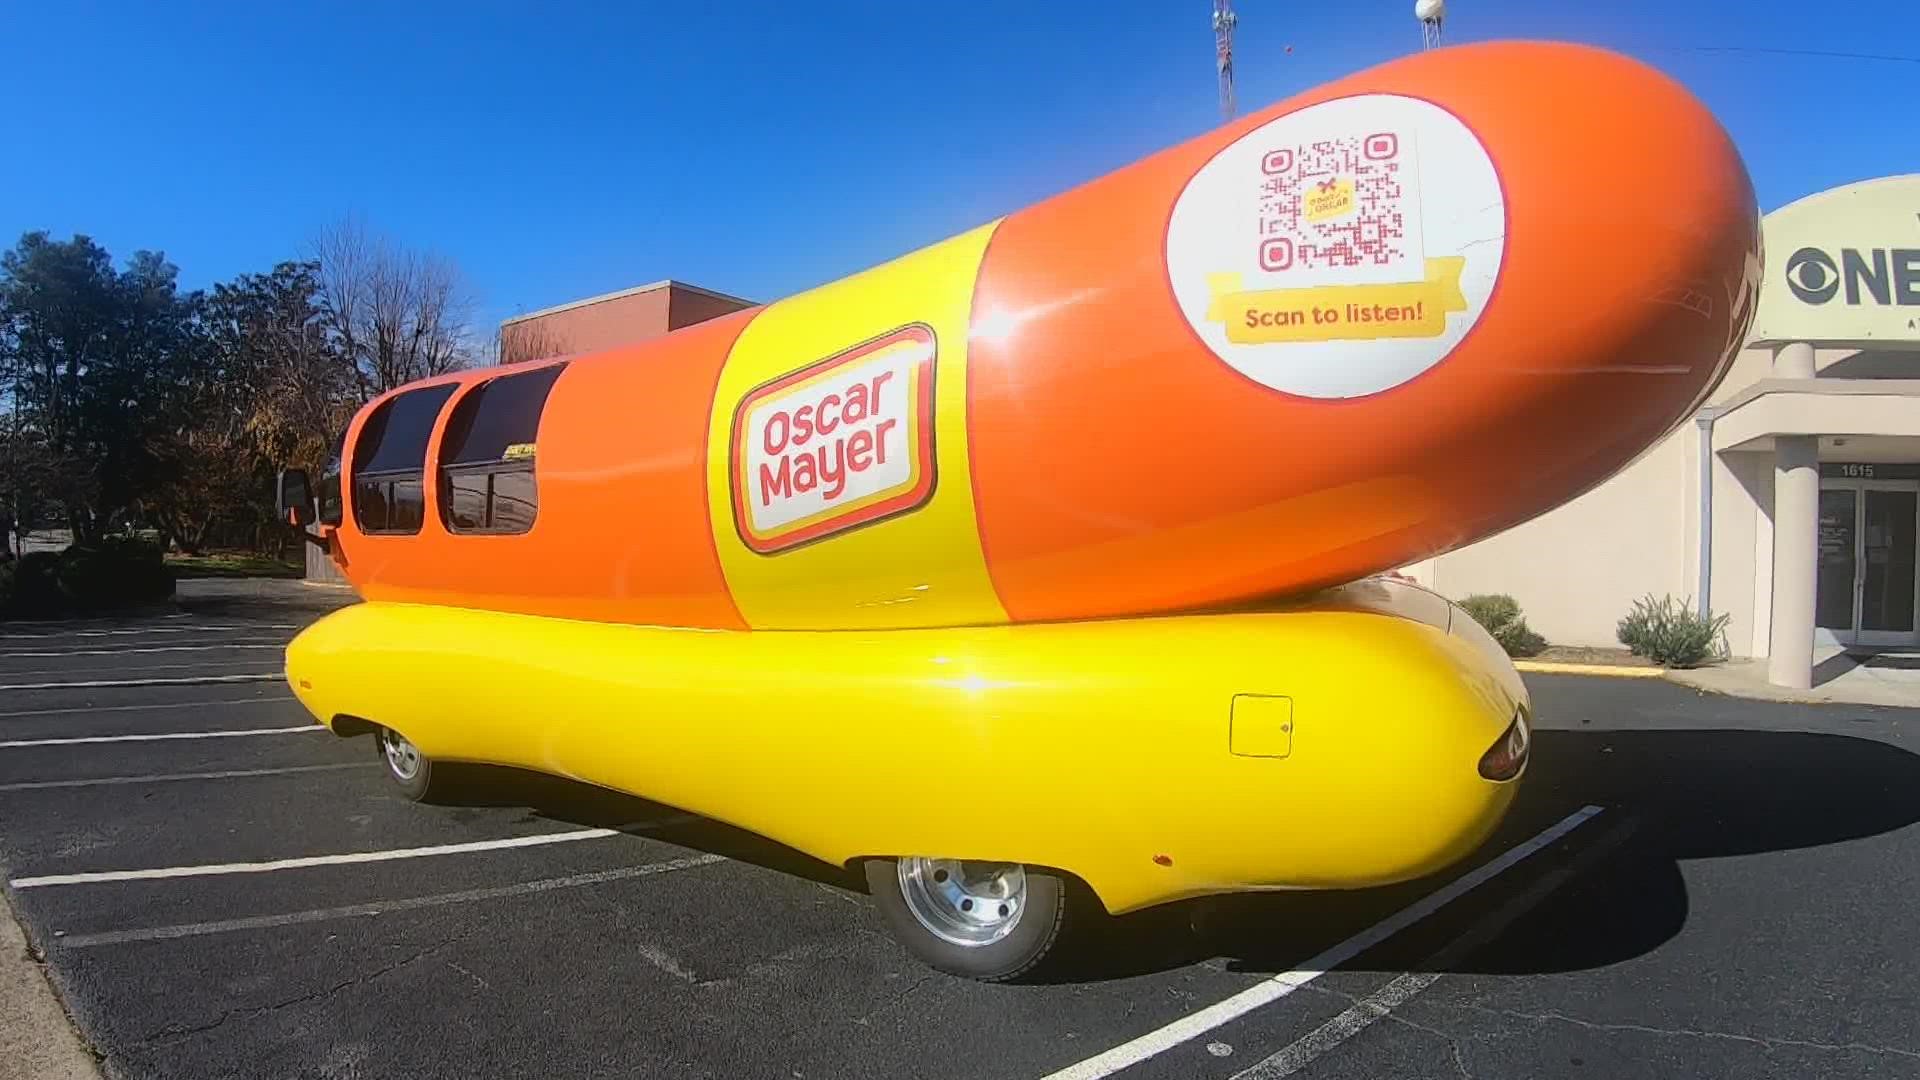 The iconic Oscar Mayer Weinermobile made a visit to the WFMY News 2 studio and we couldn't wait to get a tour!